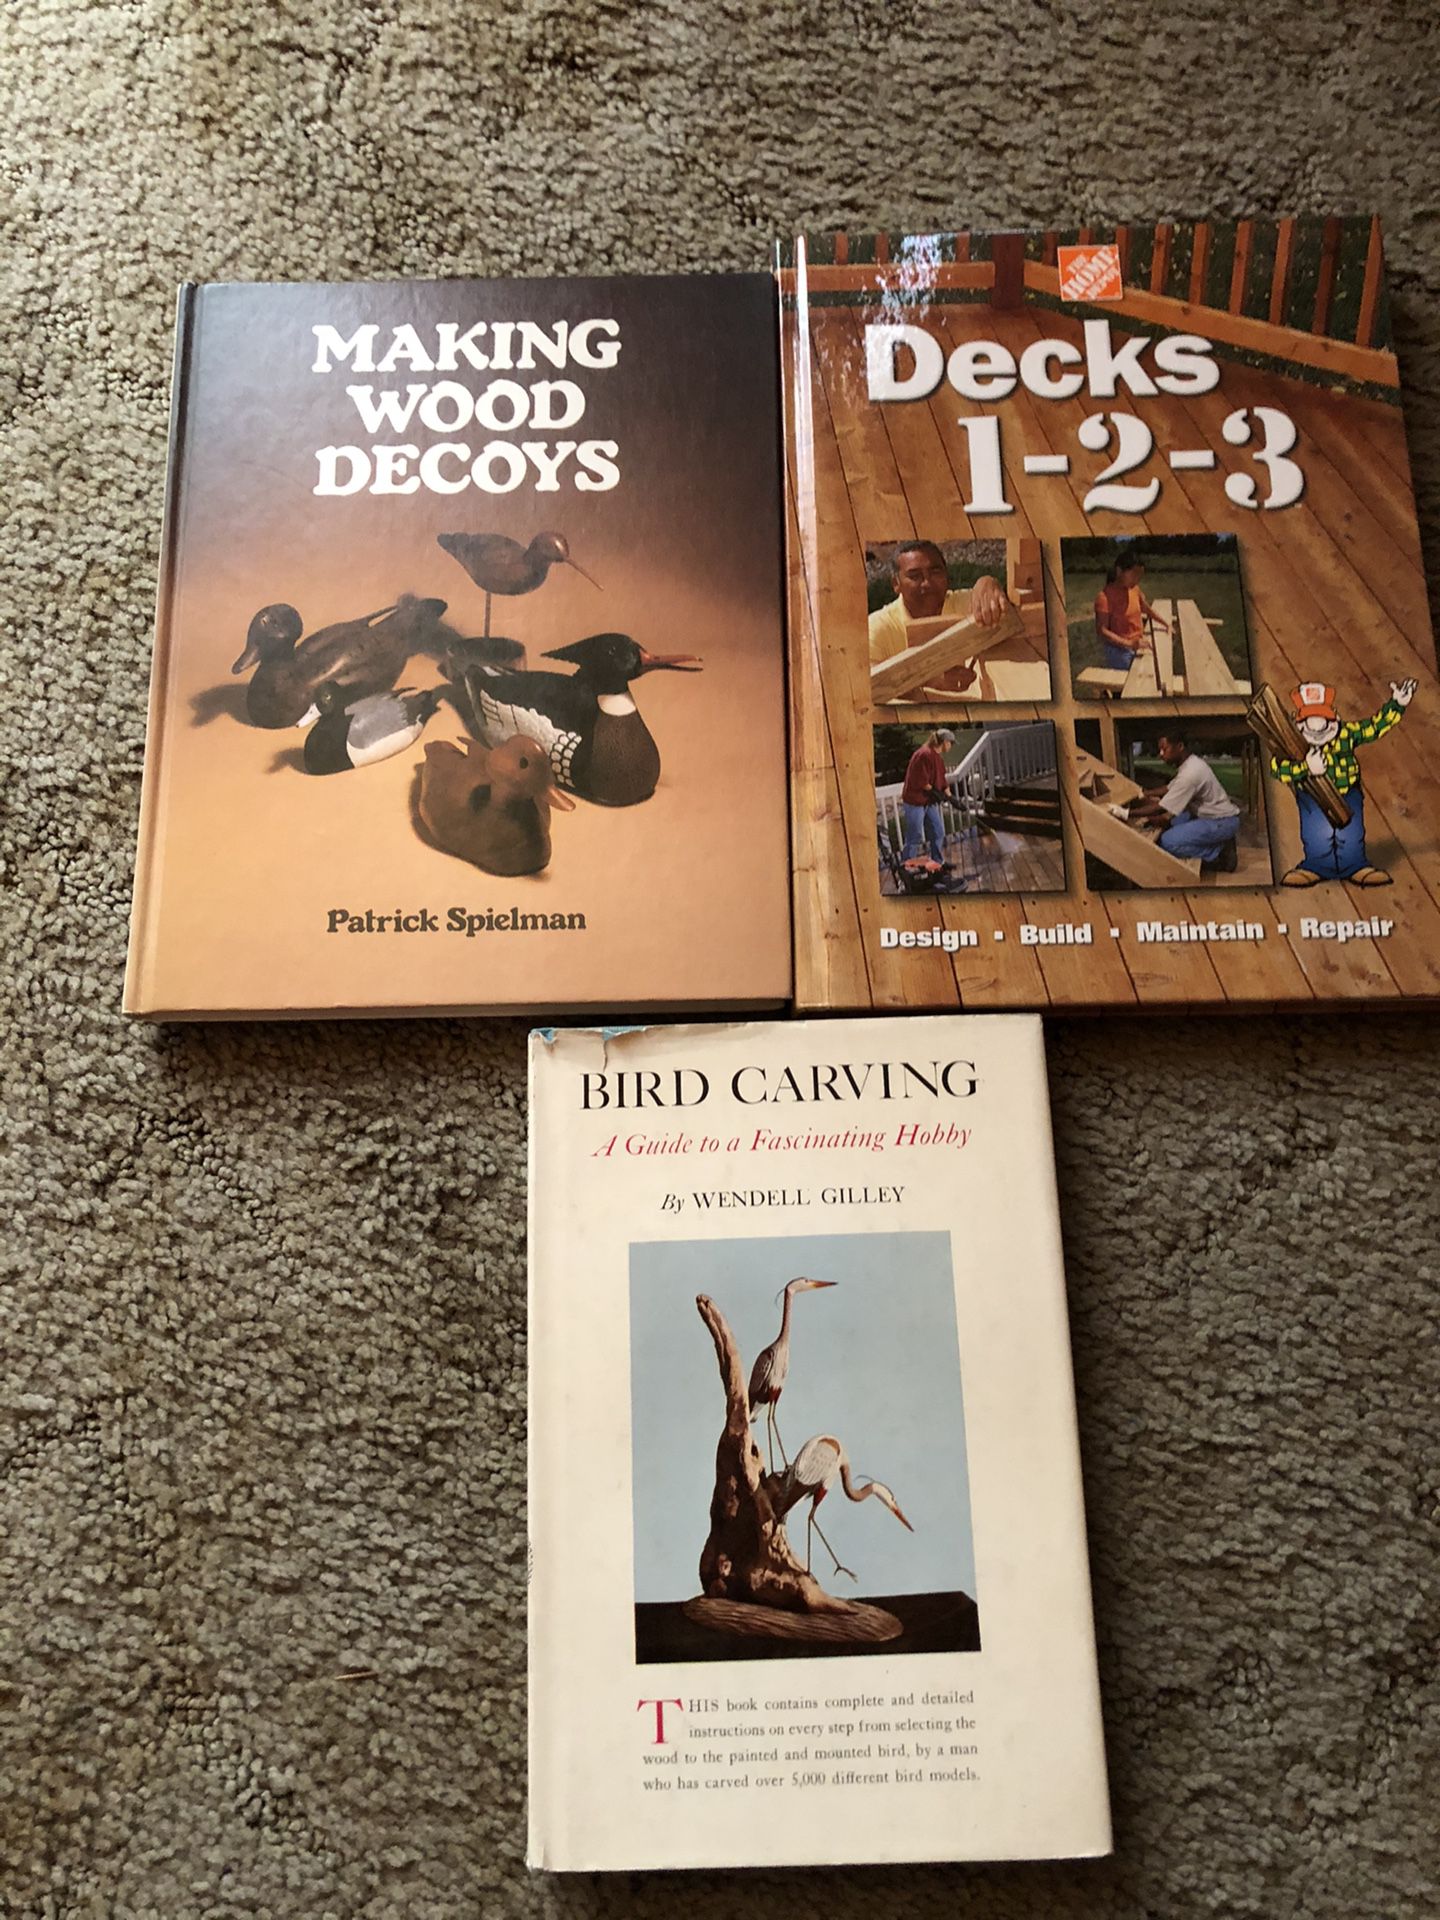 Woodworking books